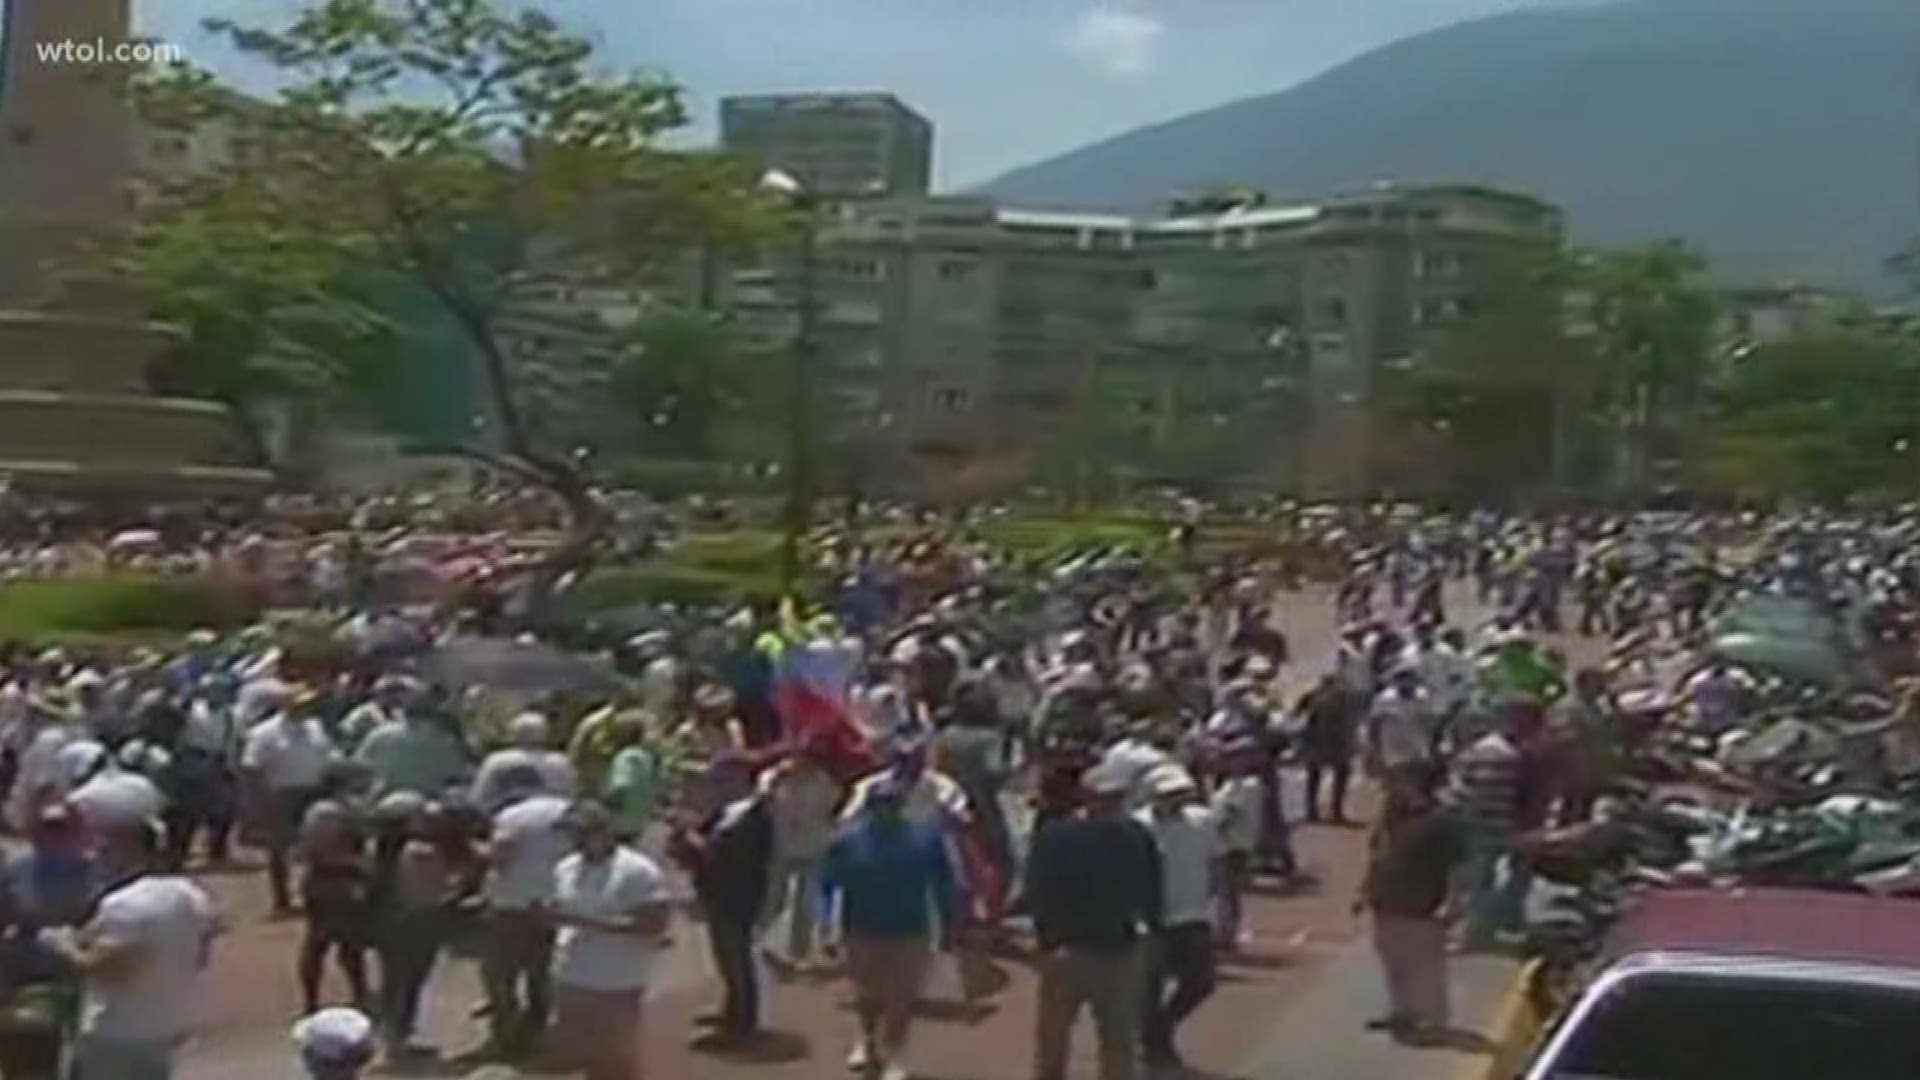 5/2: Venezuela protests, measles on cruise ship - News at 6:30 - Segment 2